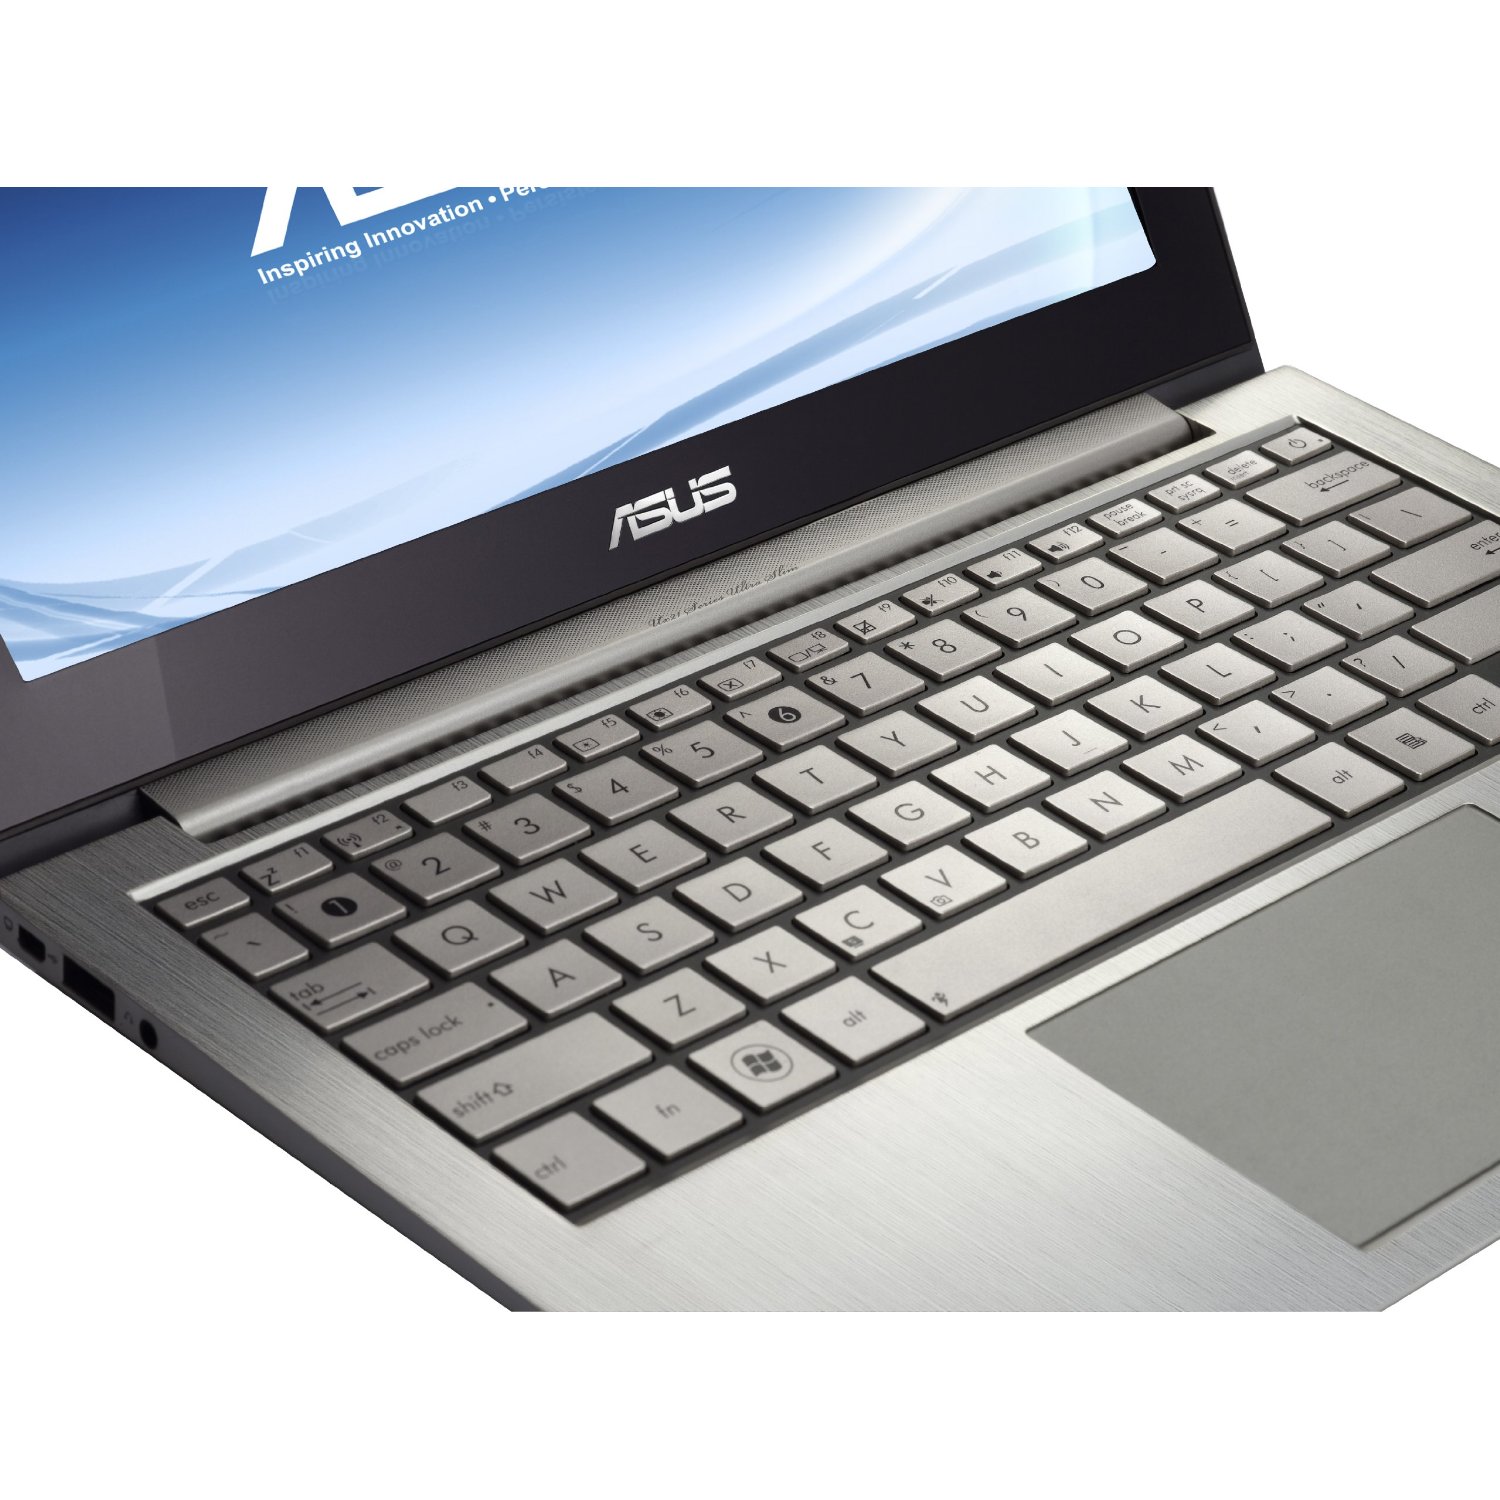 http://thetechjournal.com/wp-content/uploads/images/1112/1325329657-asus-zenbook-ux21edh71-116inch-thin-and-light-ultrabook-9.jpg